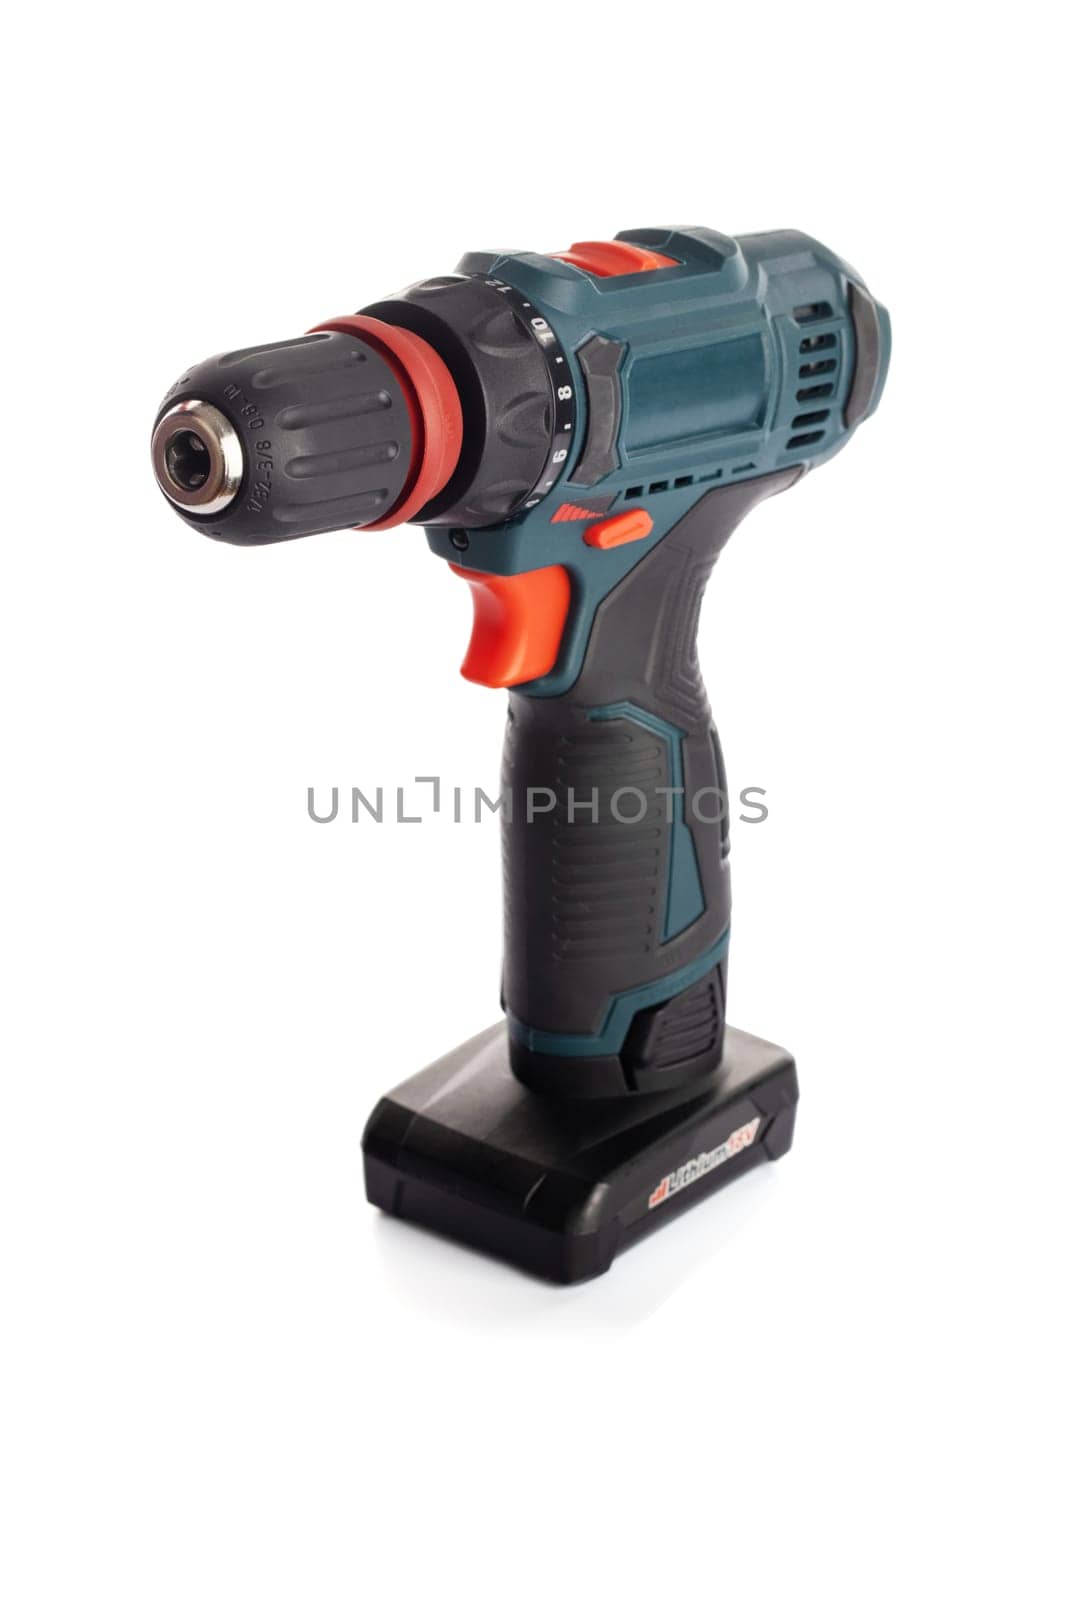 Cordless drill screwdriver isolated on white background. Professional home repair tool